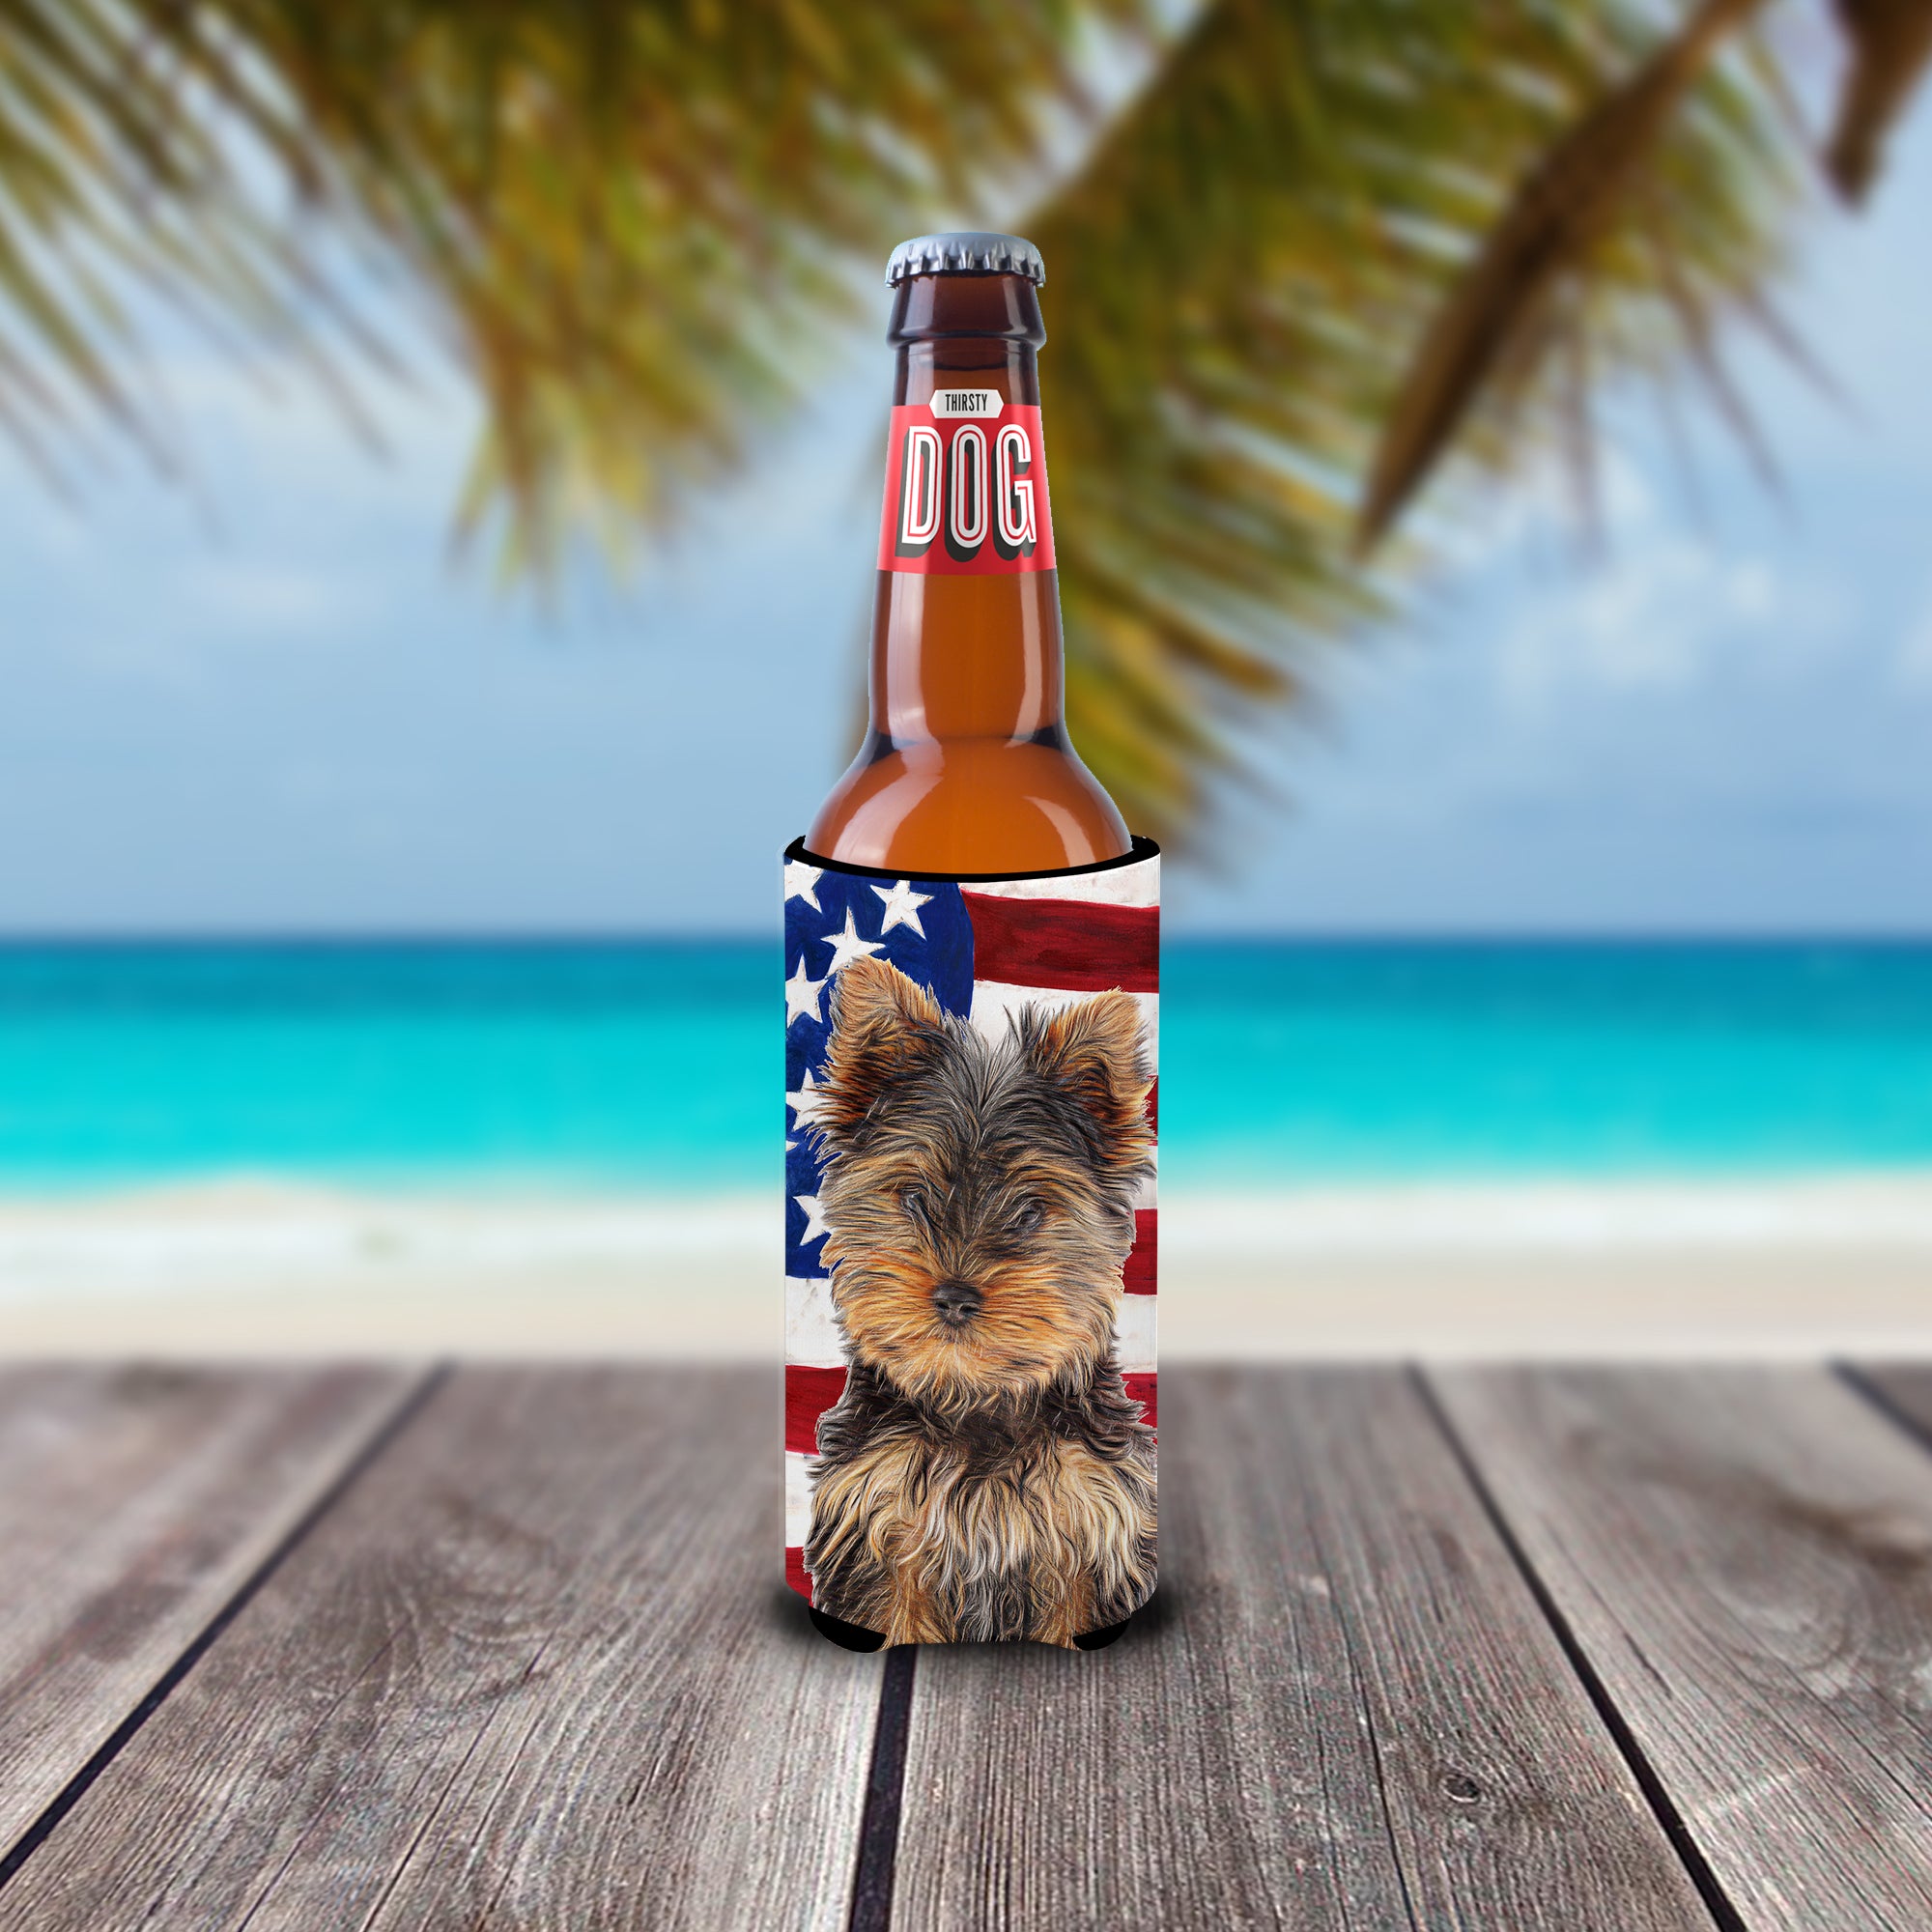 USA American Flag with Yorkie Puppy / Yorkshire Terrier Ultra Beverage Insulators for slim cans KJ1160MUK